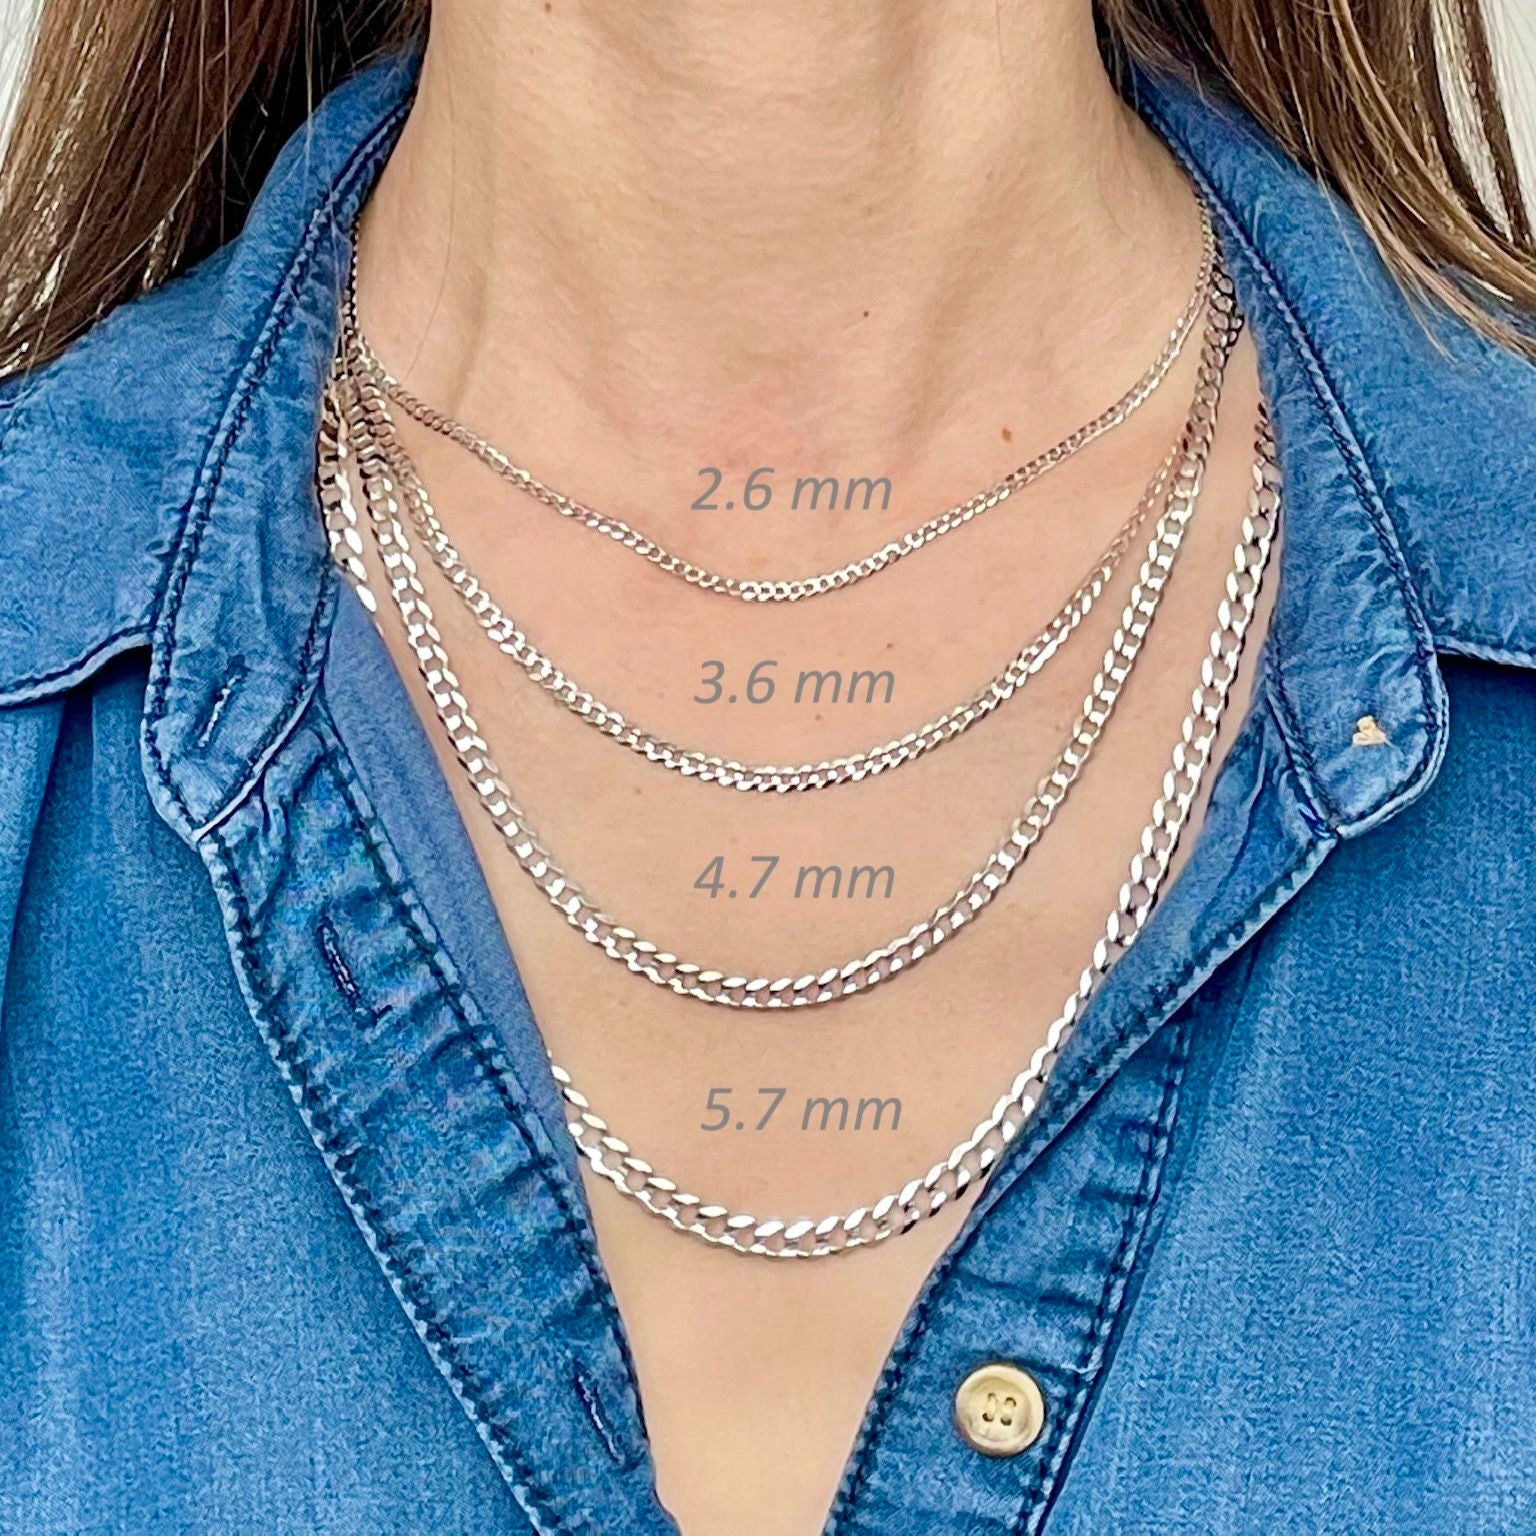 14K Solid White Gold Curb Link Chain Necklace